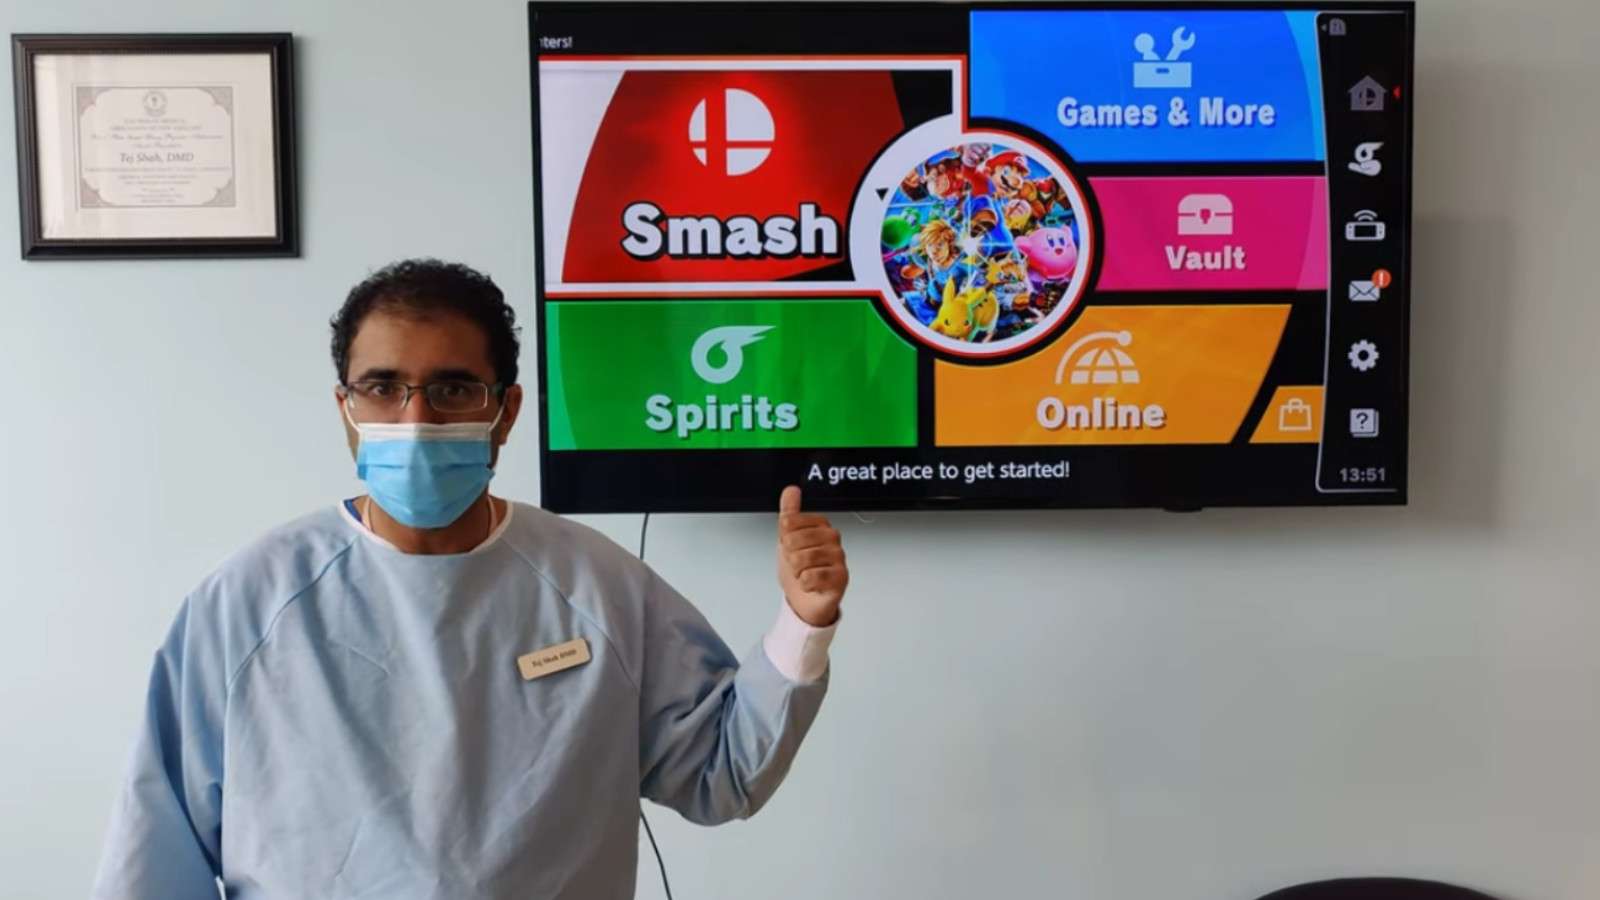 Dr Shah wants to play you in Smash Ultimate